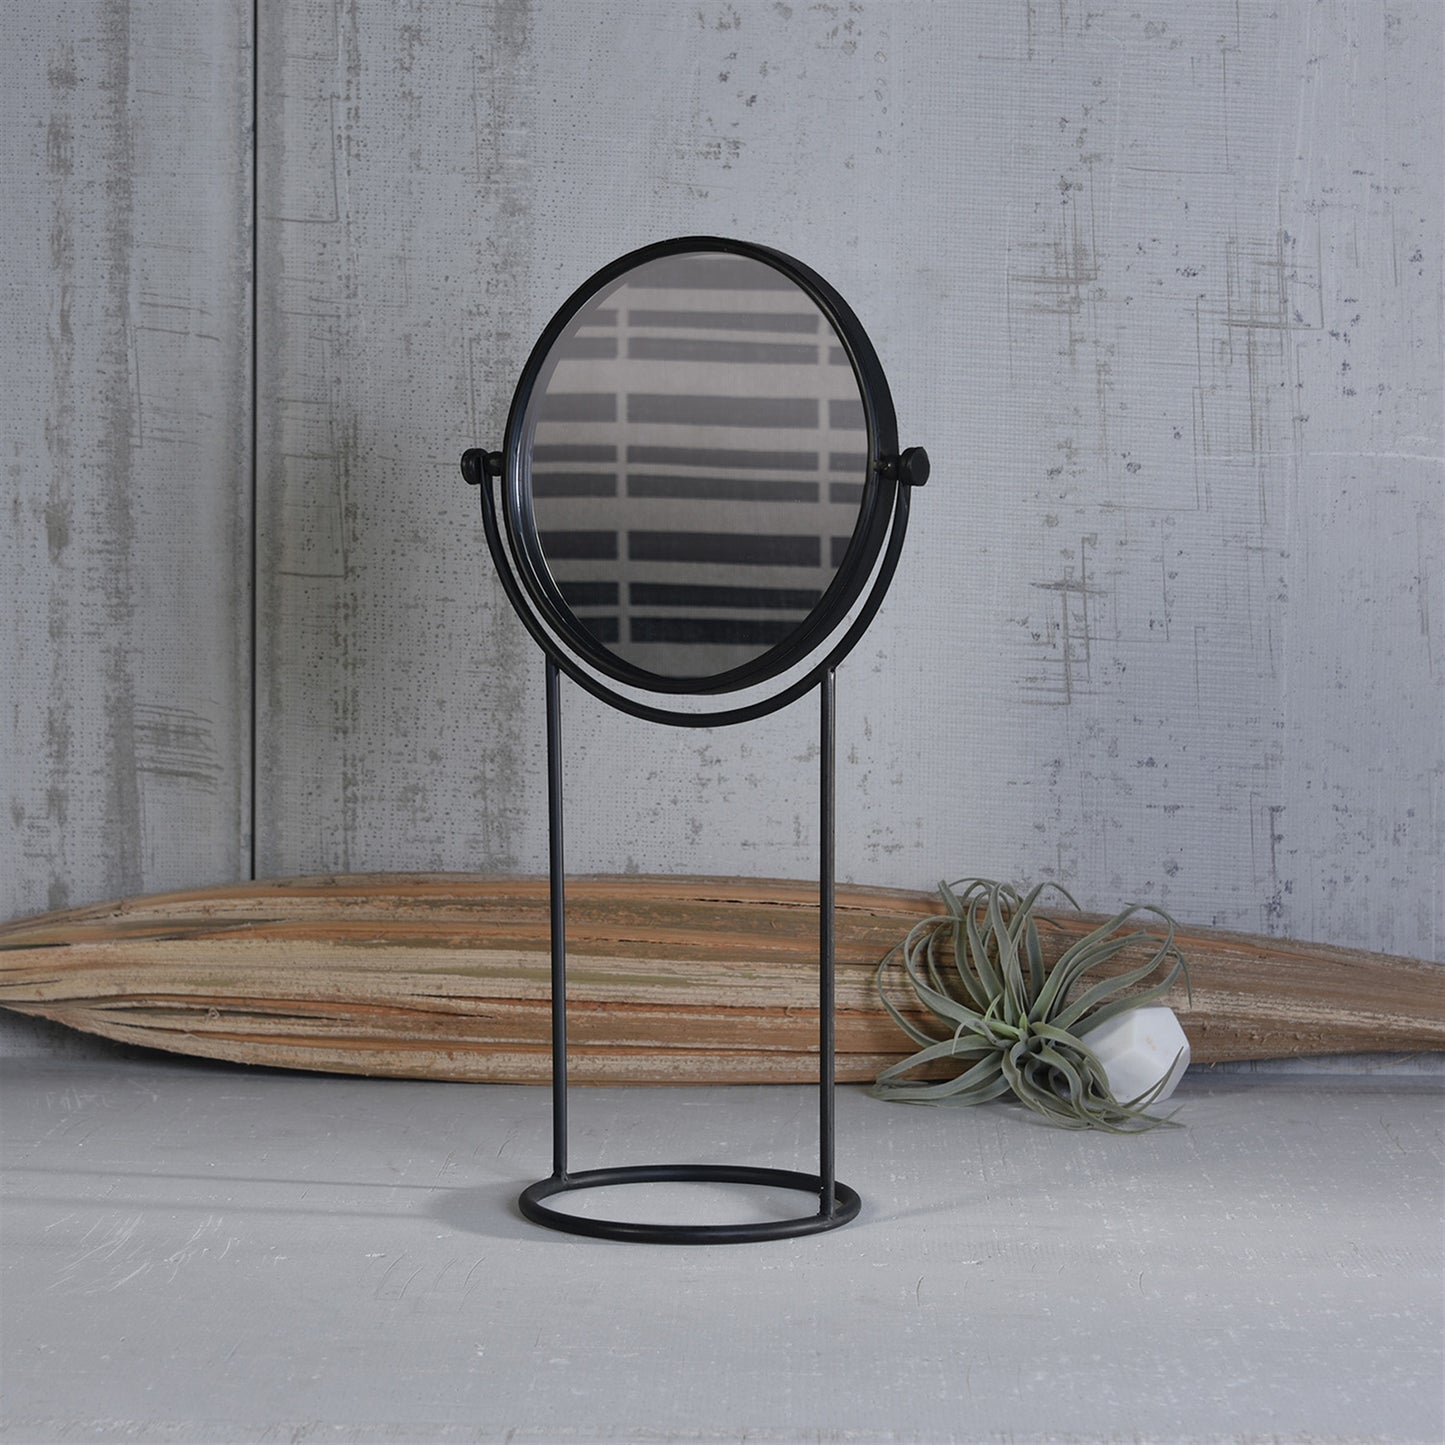 Archer Swiveling Mirror, Feathered Farmhouse